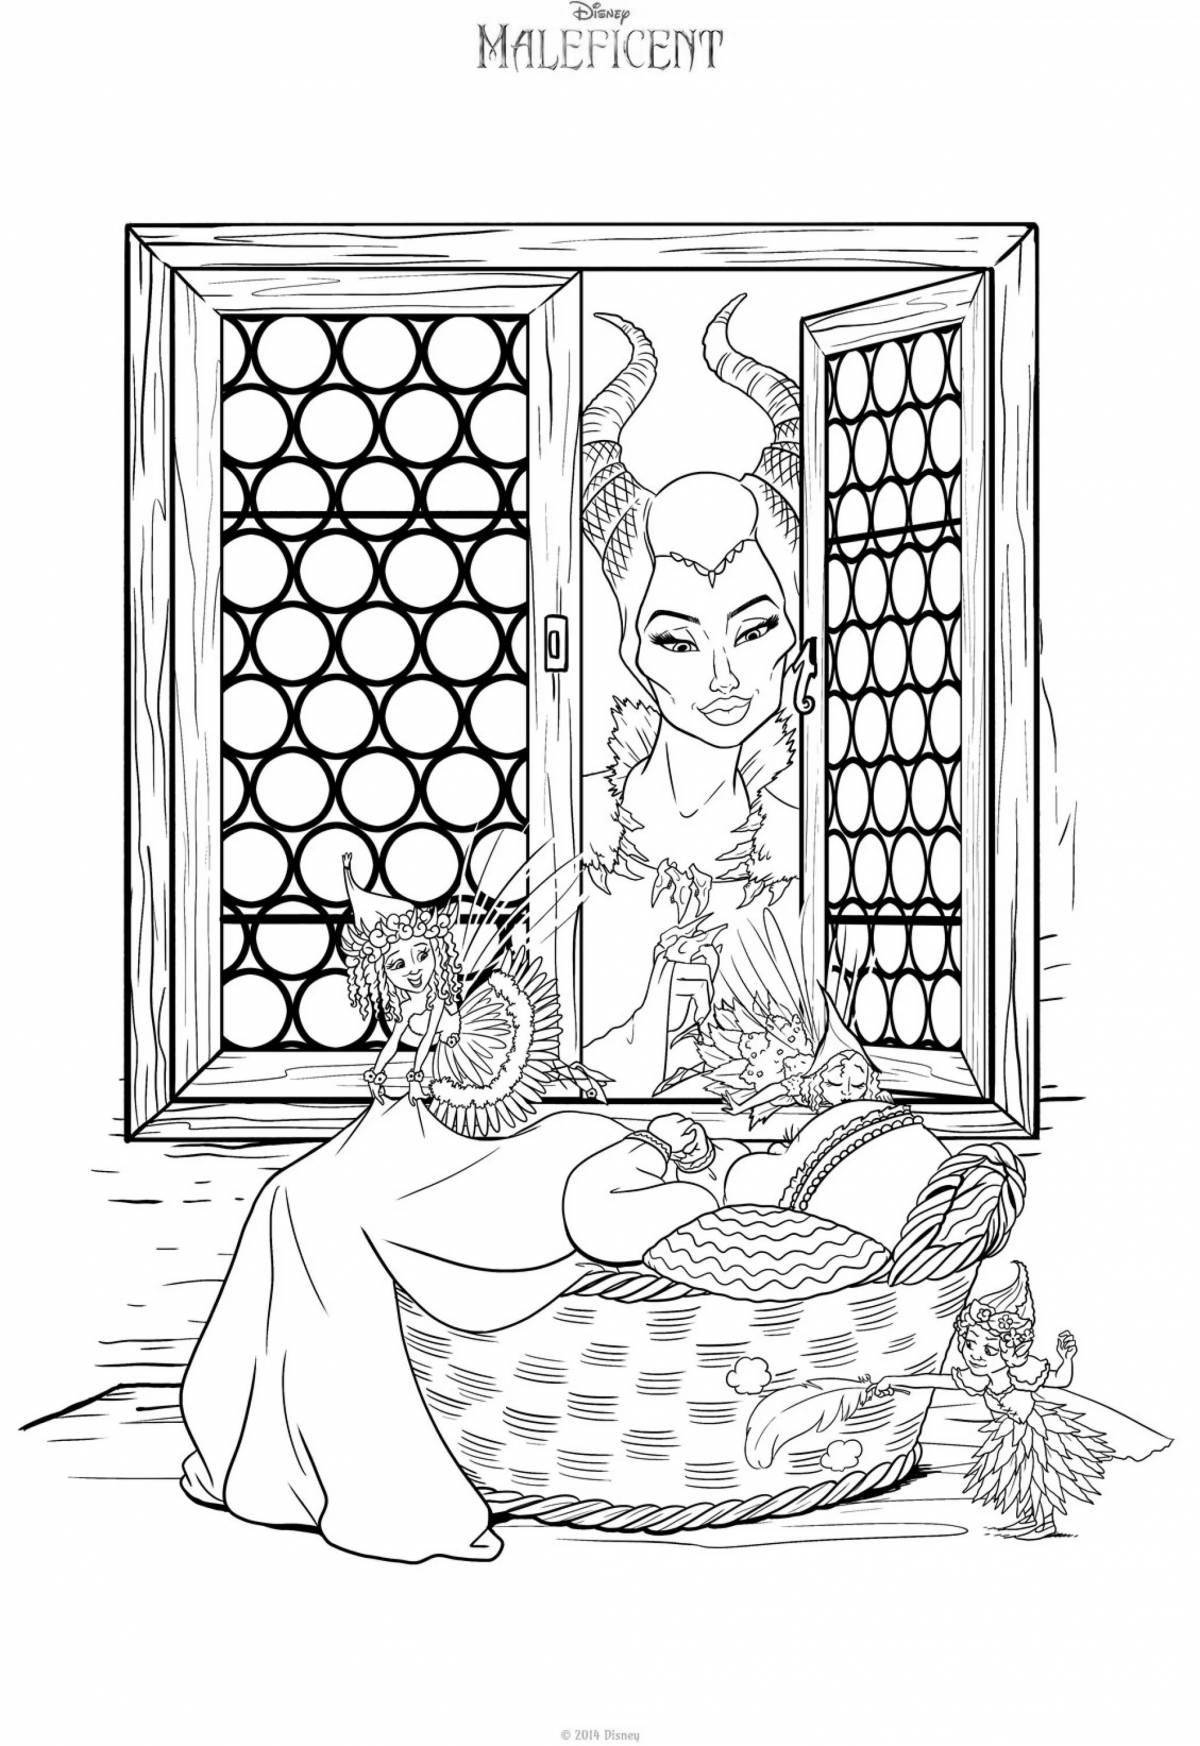 Maleficent mystical coloring book for kids